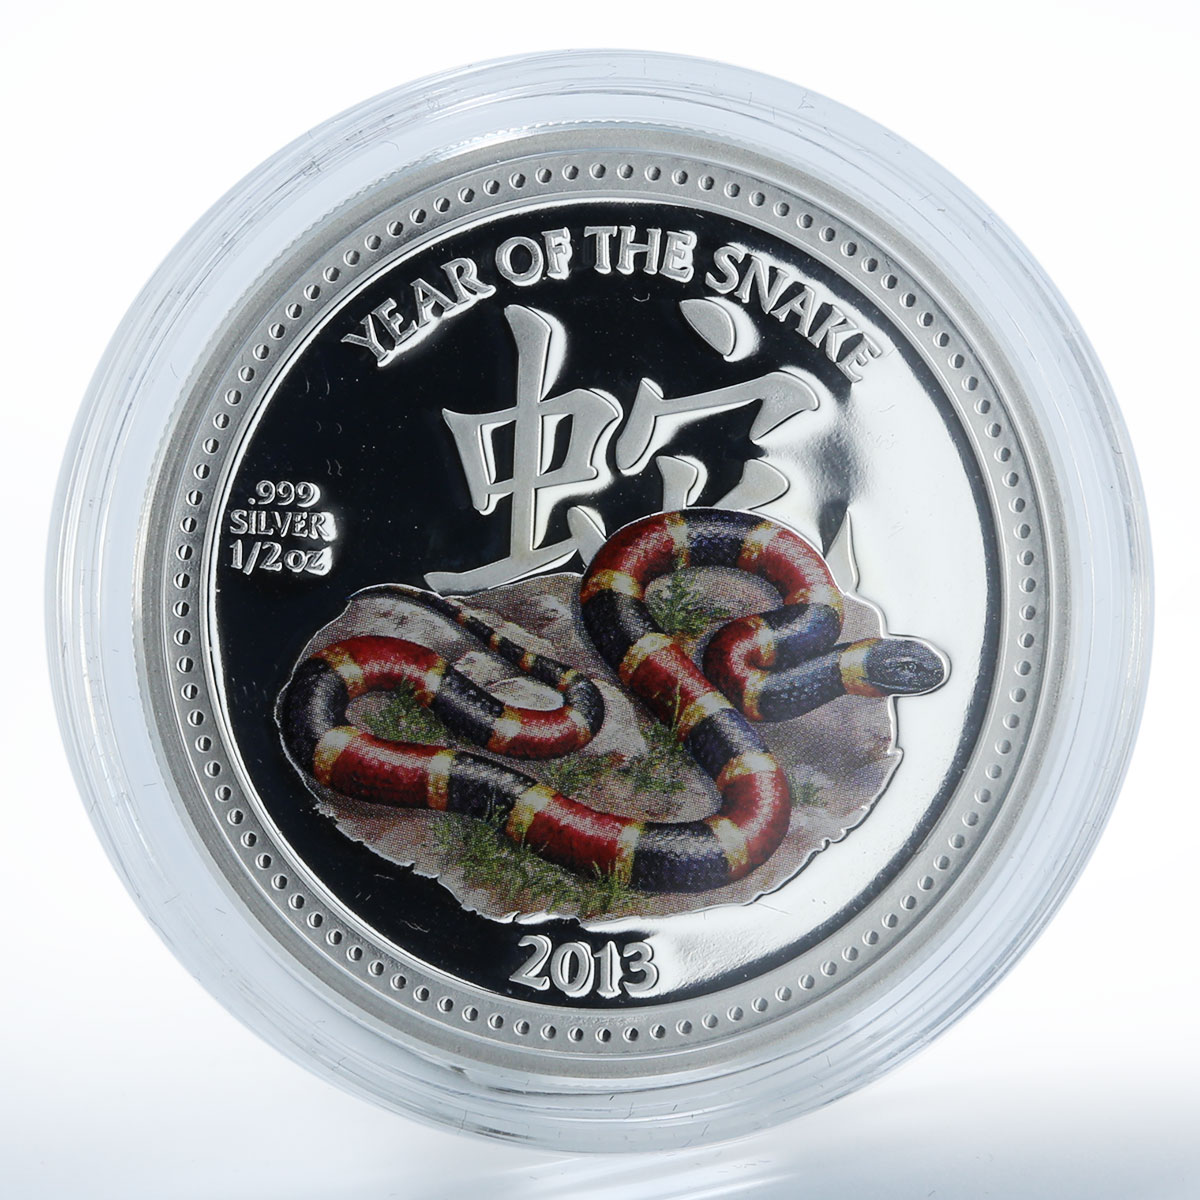 Niue 1 dollar Lunar Year of the Snake Coral Snake colored proof silver coin 2013